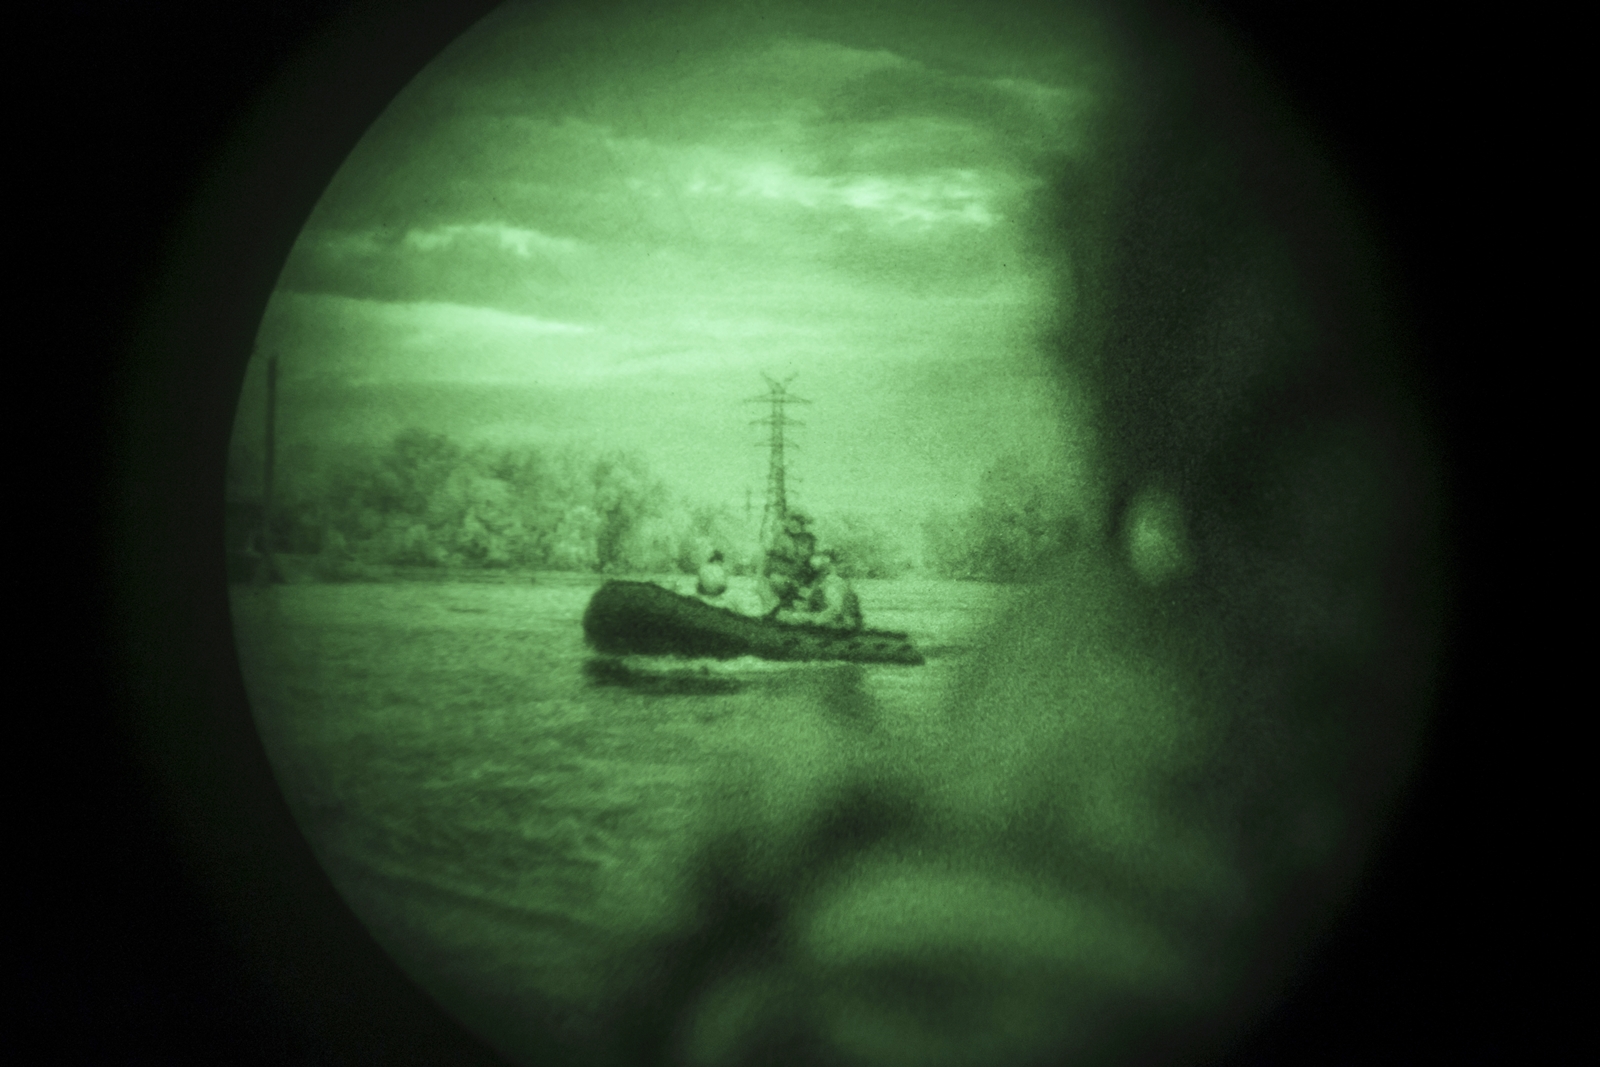 Ukraine Special Operations Forces soldiers navigate the Dnipro River using night vision goggles, or NVG, during a night mission in Kherson region, Ukraine, Sunday, June 11, 2023. (AP Photo/Felipe Dana)